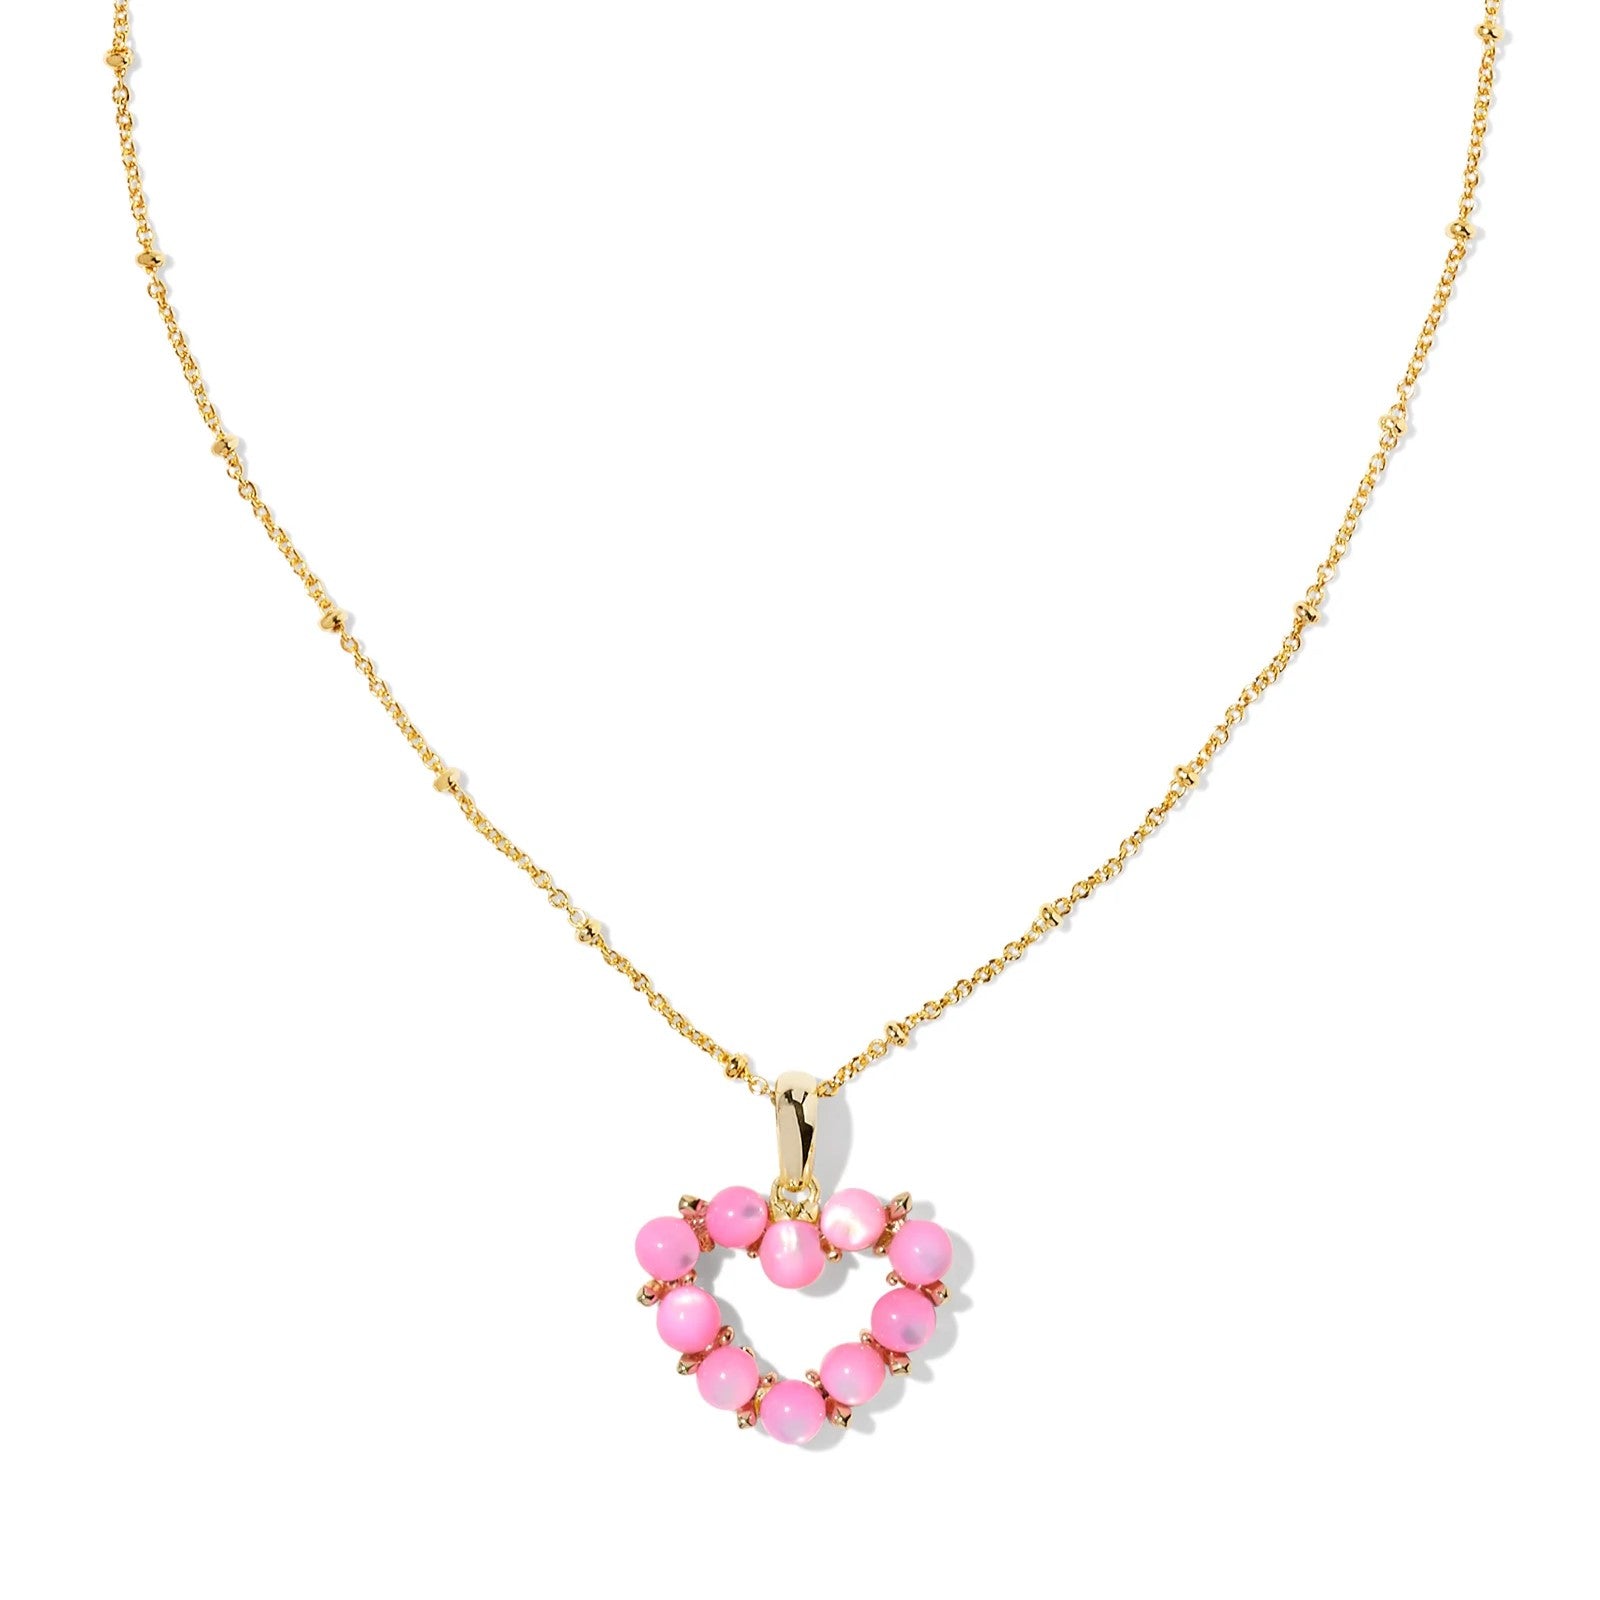 Kendra Scott | Ashton Gold Heart Short Pendant Necklace in Blush Ivory Mother-of-Pearl - Giddy Up Glamour Boutique